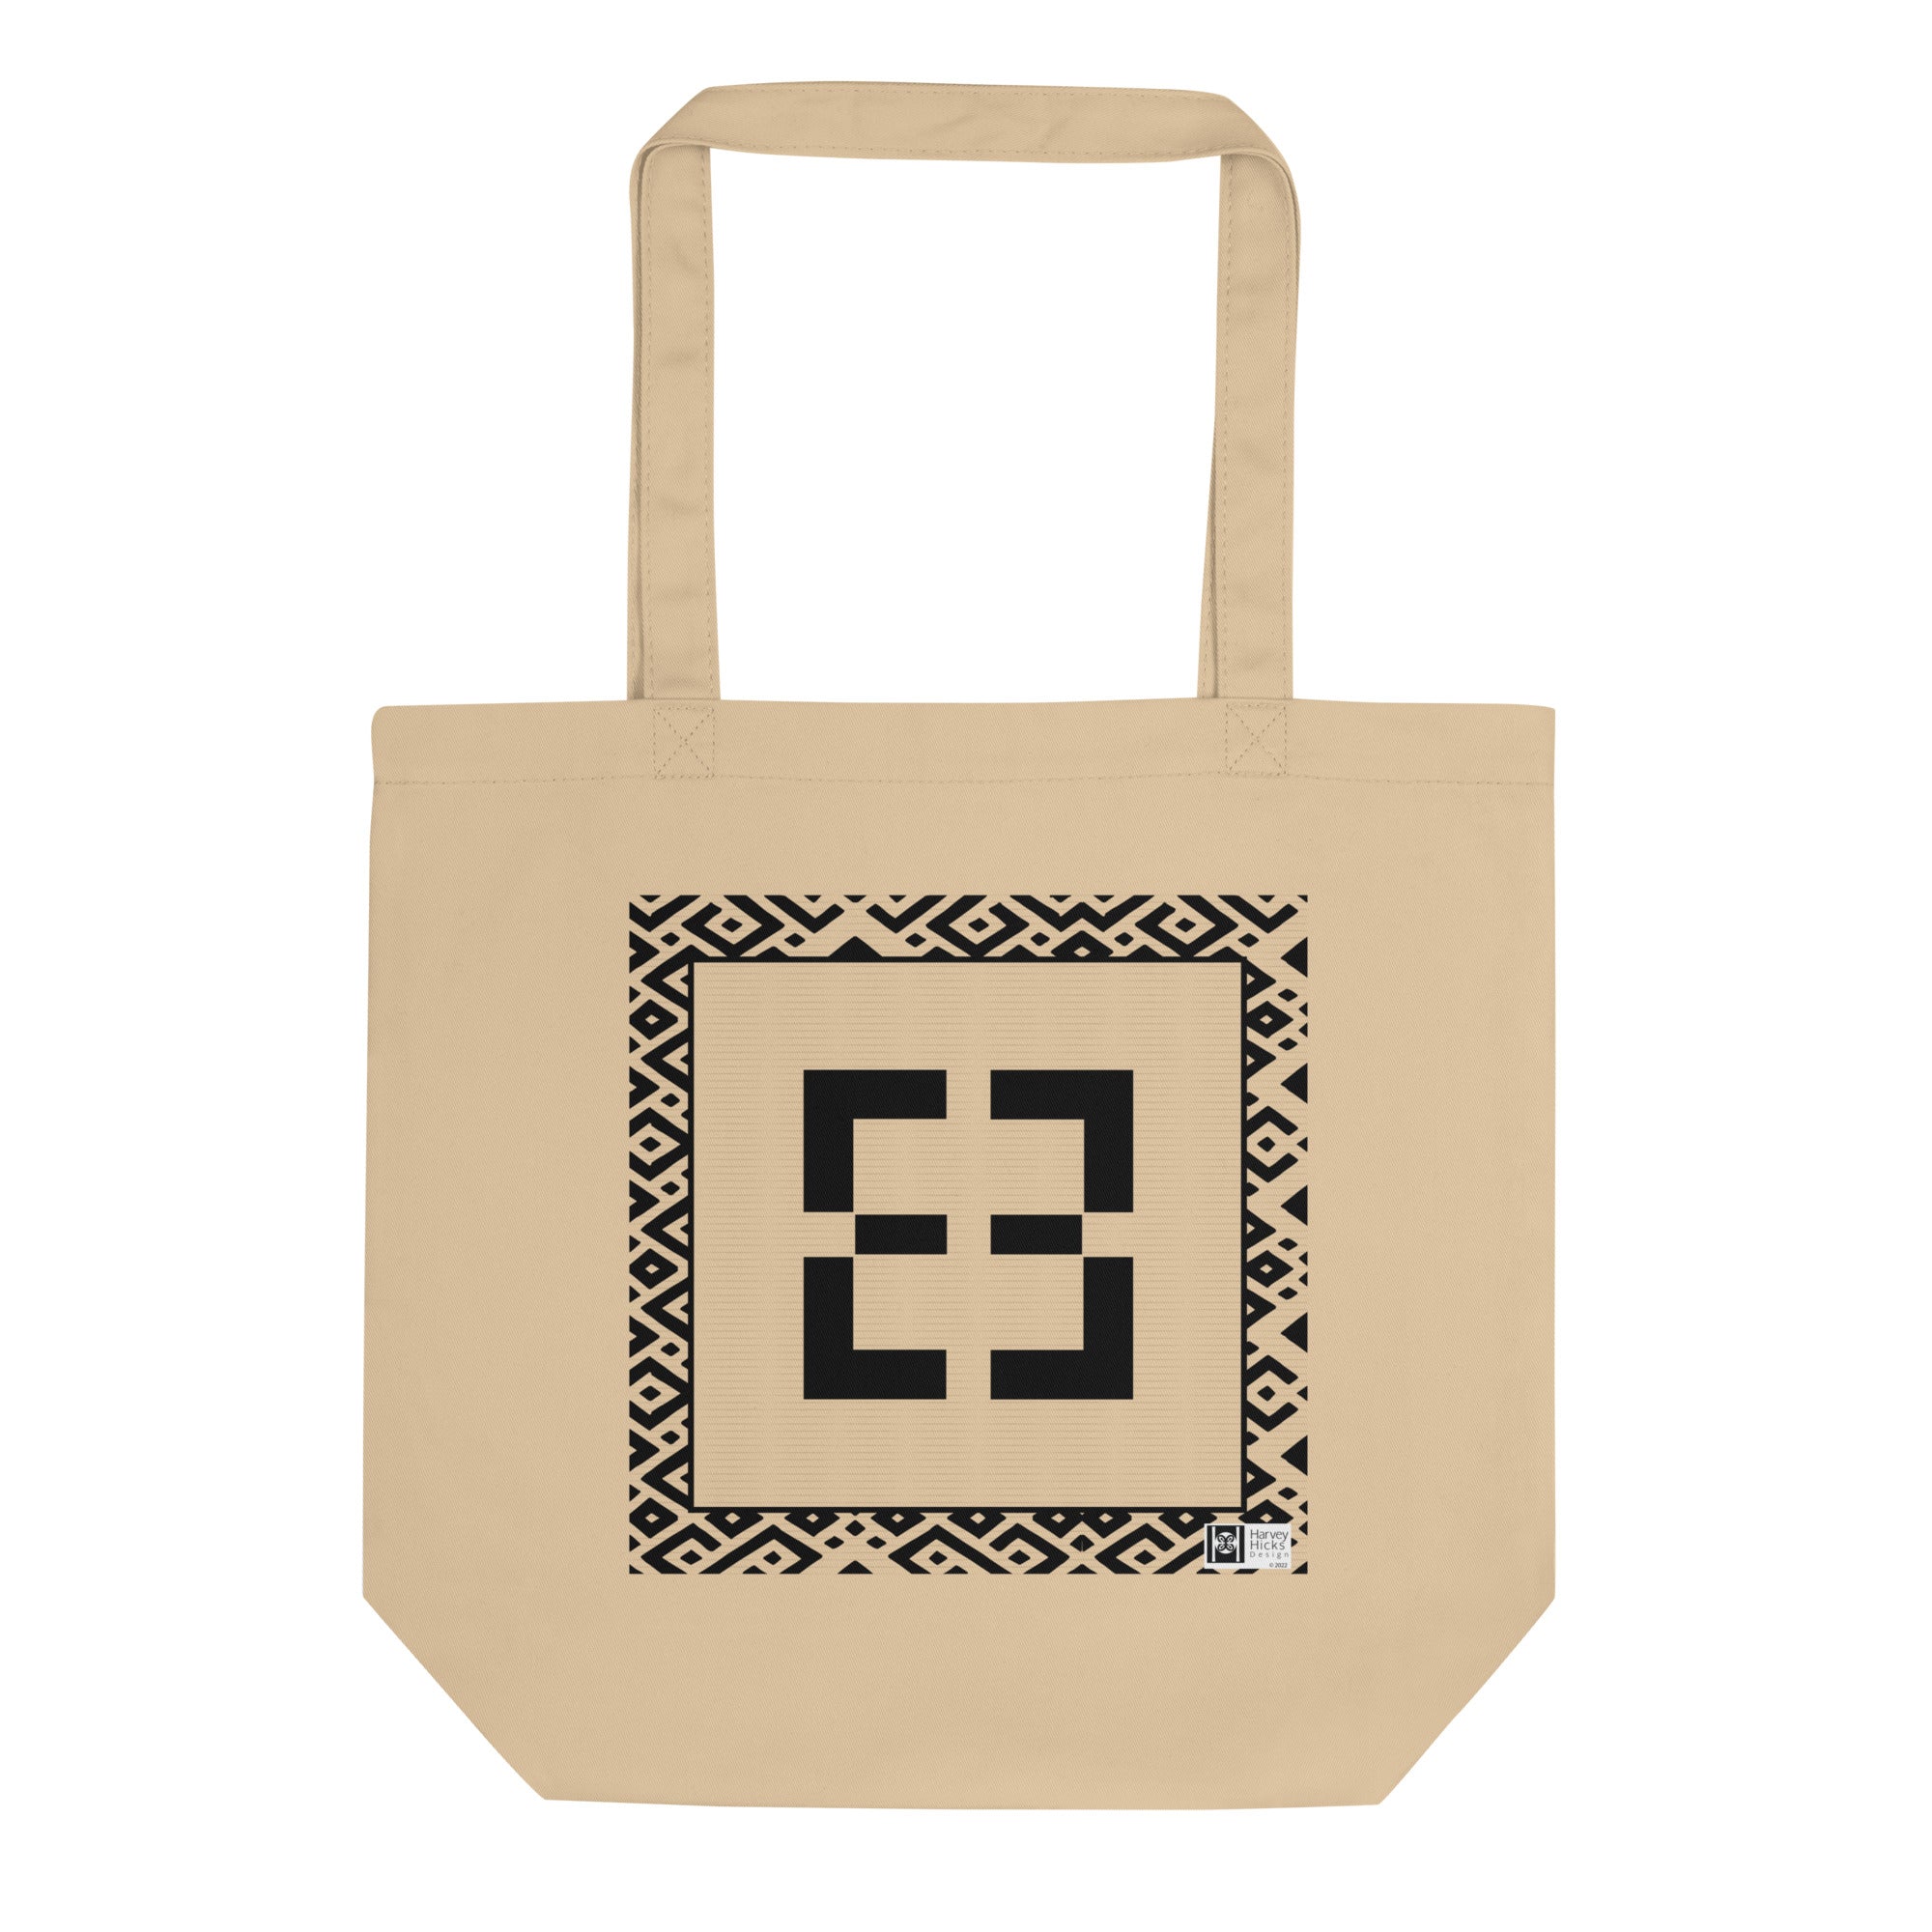 100% cotton Eco Tote Bag, featuring the Adinkra symbol for support of good causes, NO TEXT